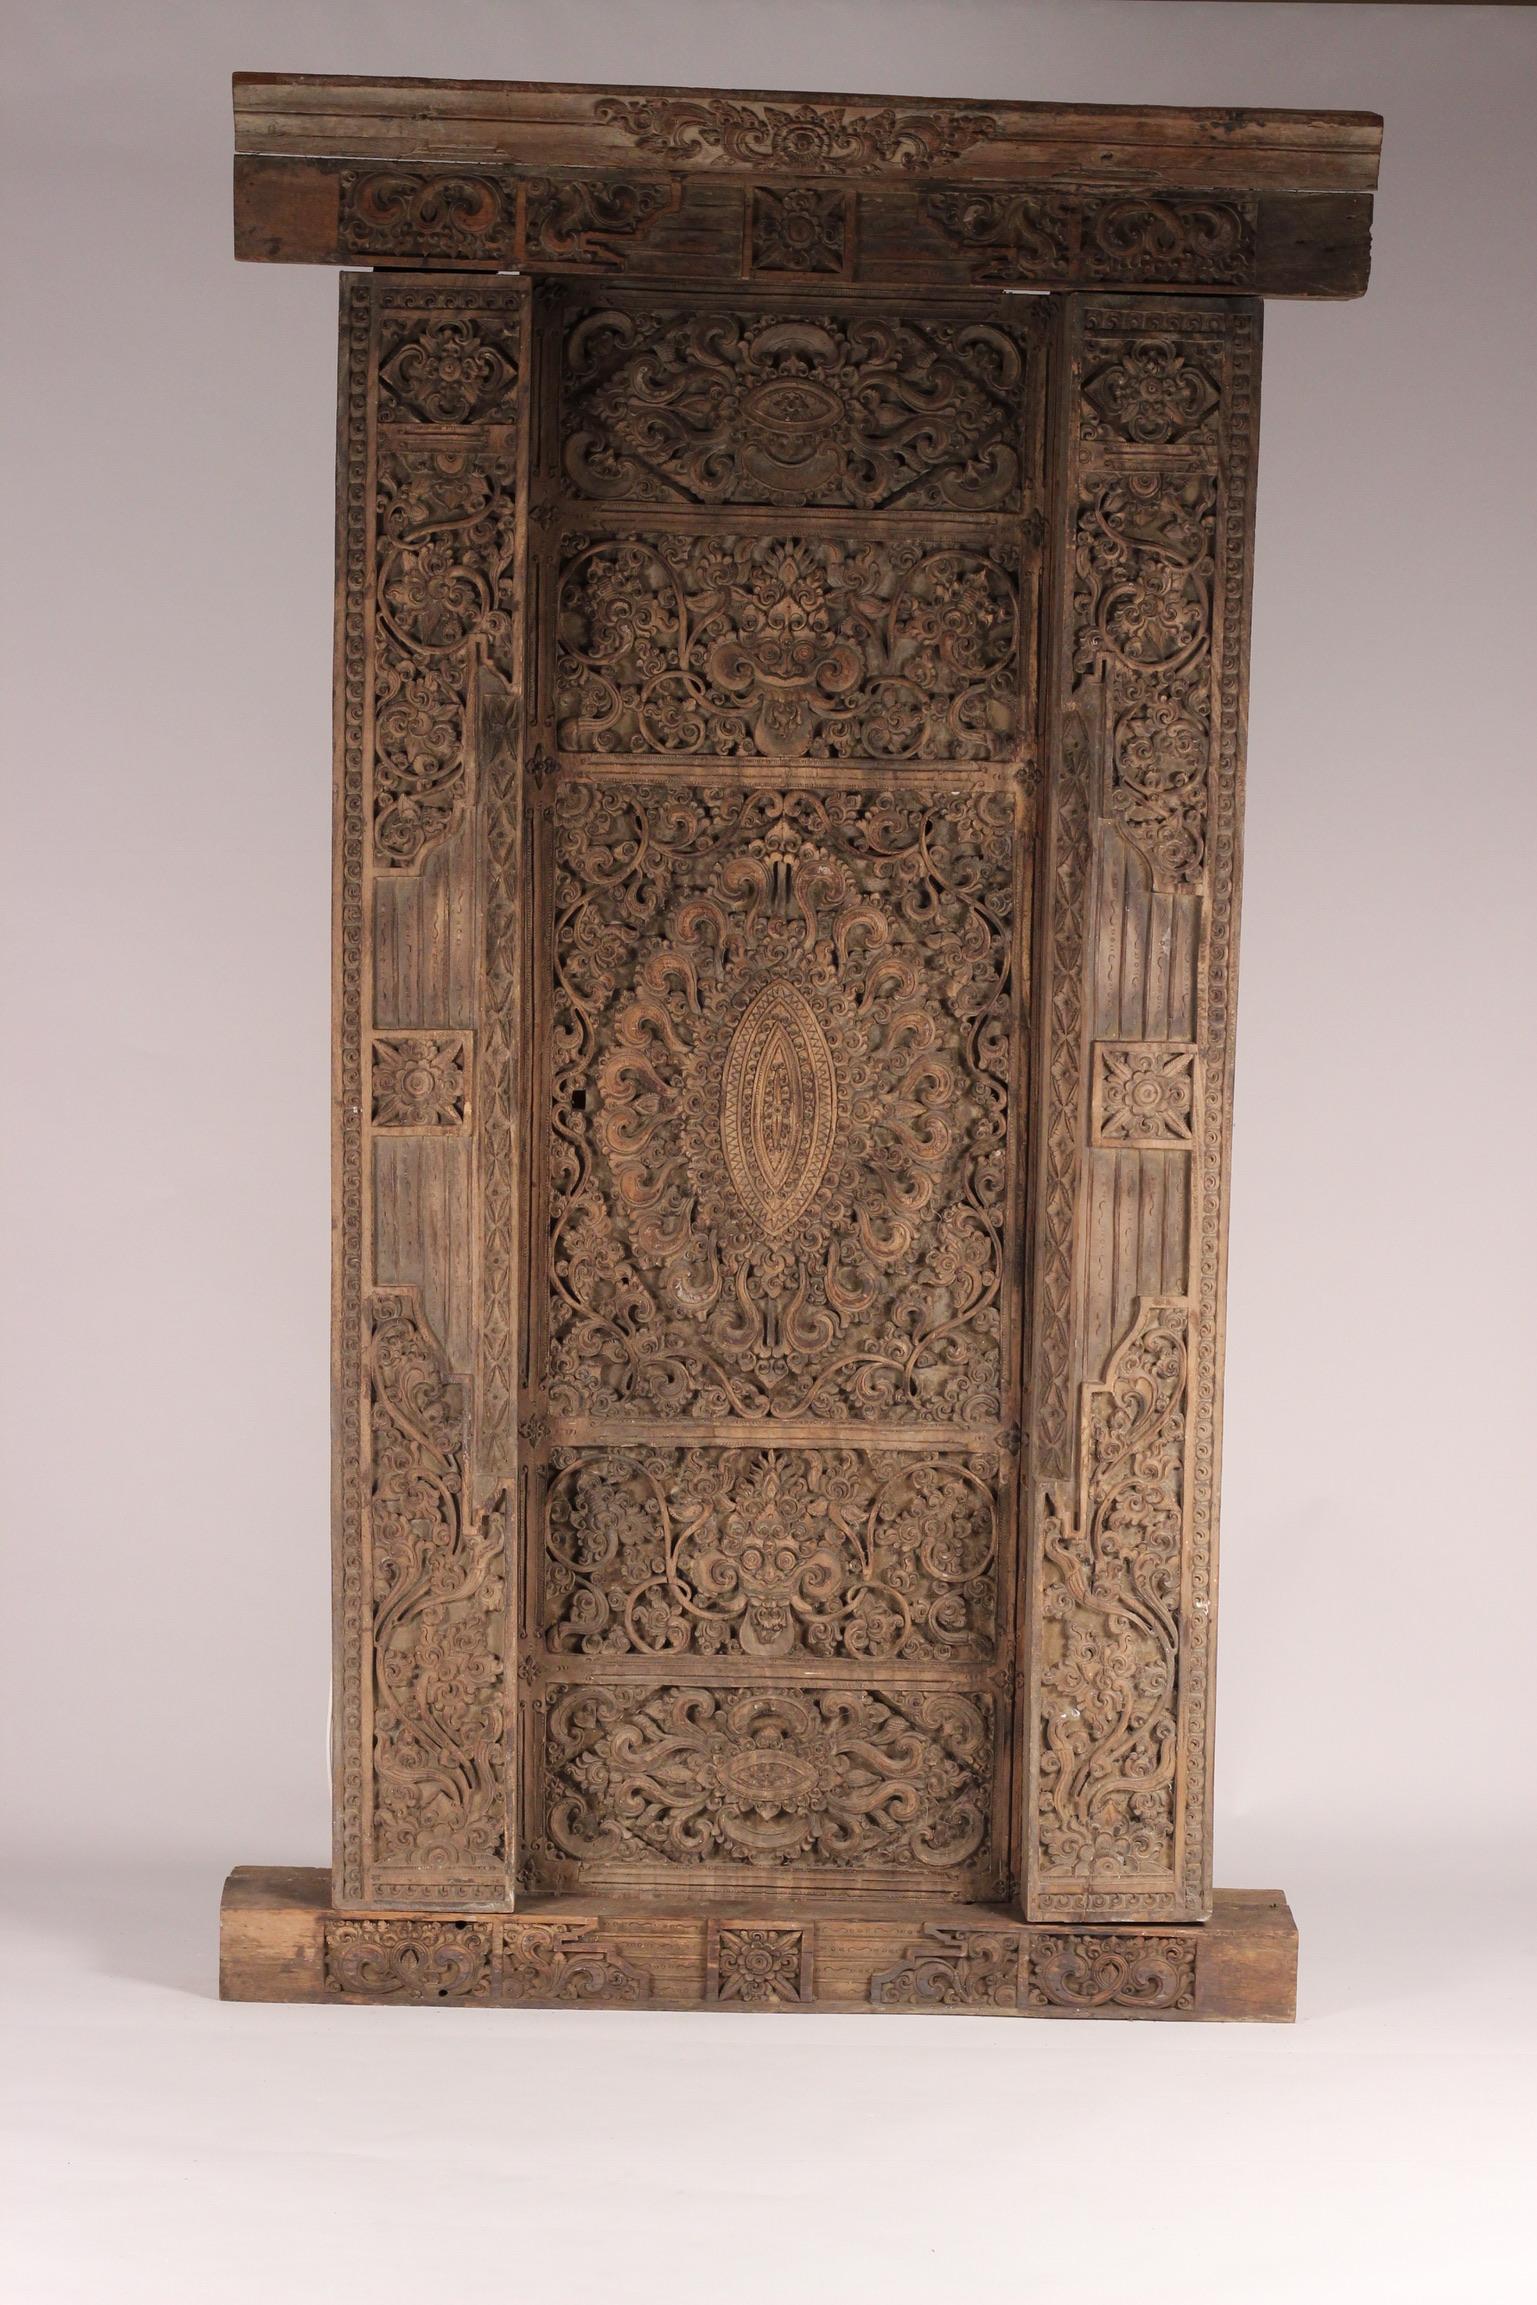 An ornate and highly skilled early example of hand carved Balinese Temple door. Discovered in the interior of the Island near Ubud by our principle Director some 22 years ago.
Having travelled extensively with a guide, we uncovered a treasure trove